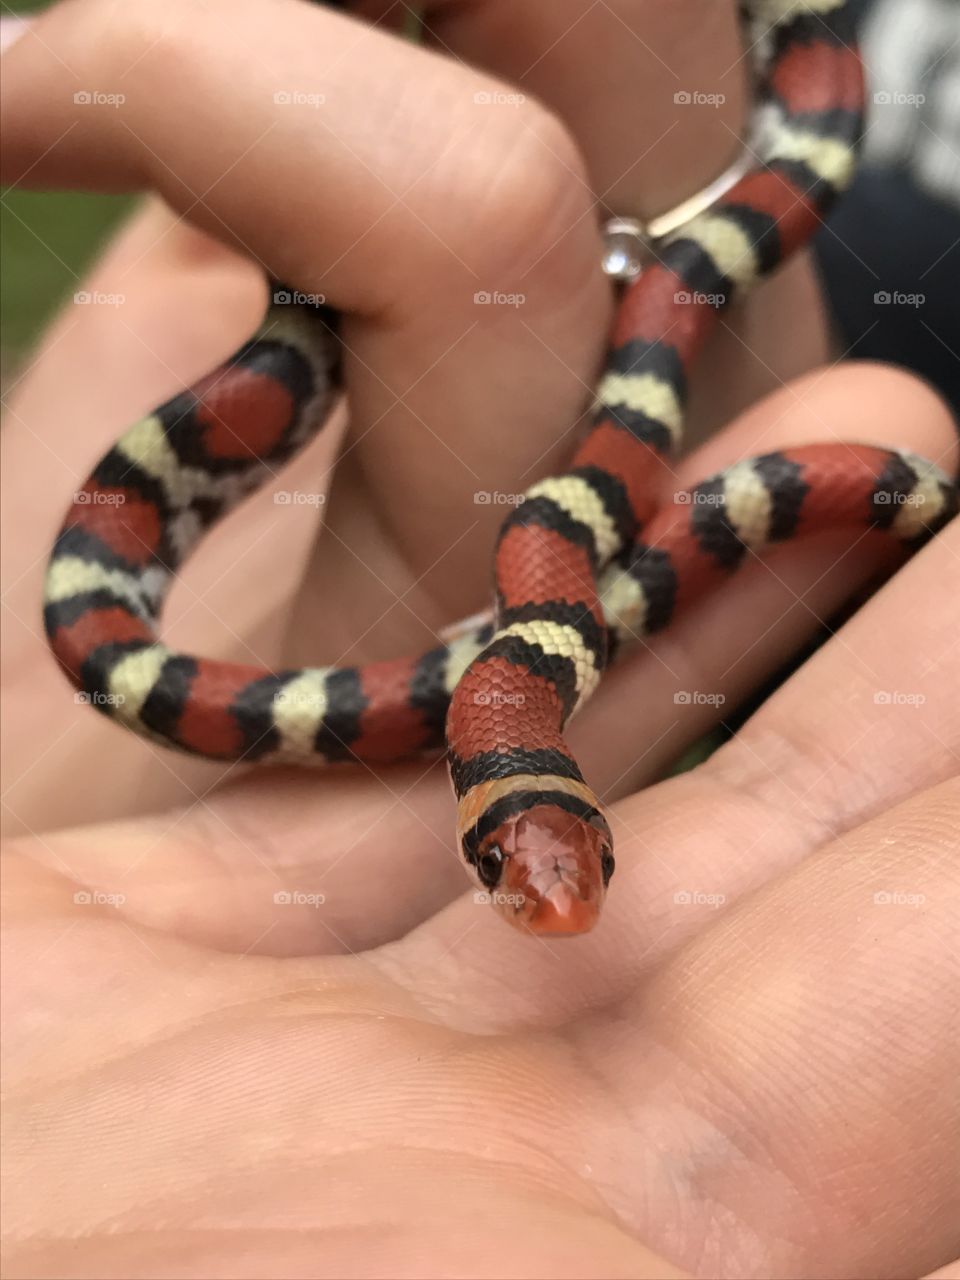 Located this young Scarlett King snake in a gopher tortoise burrow.